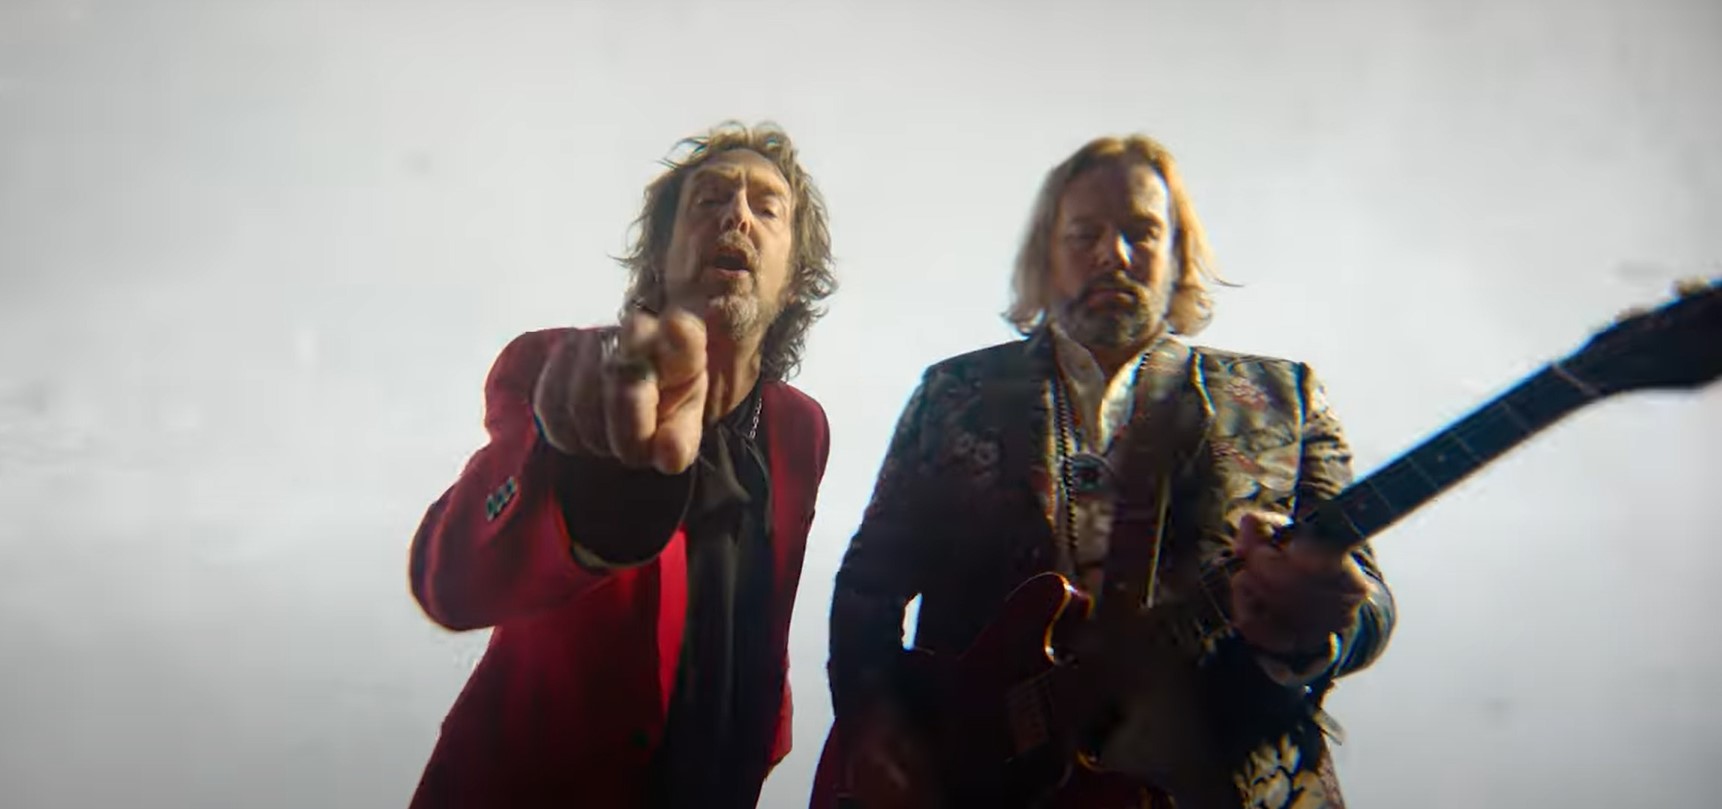 Watch New Black Crowes Video For "Wanting And Waiting"